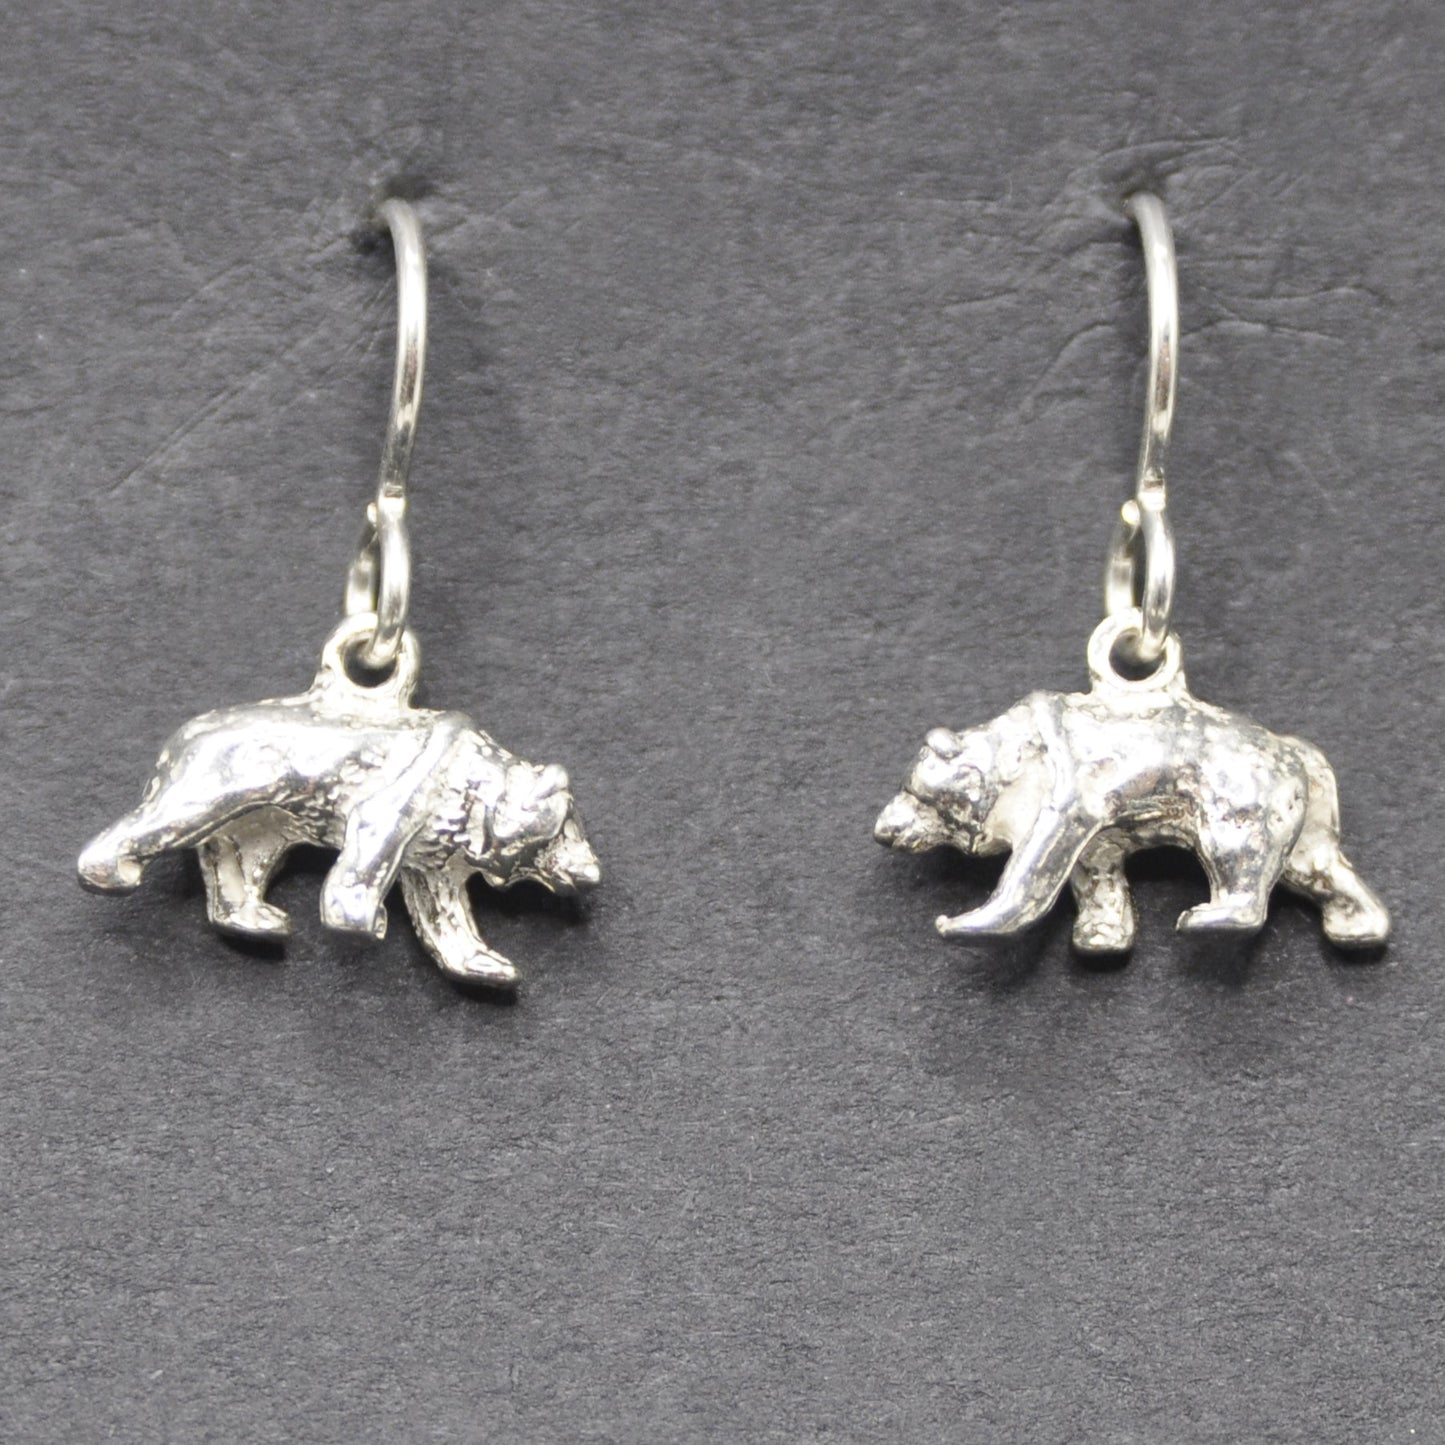 Bear Earrings, intricately designed Handcrafted Silver Jewelry Endangered Species